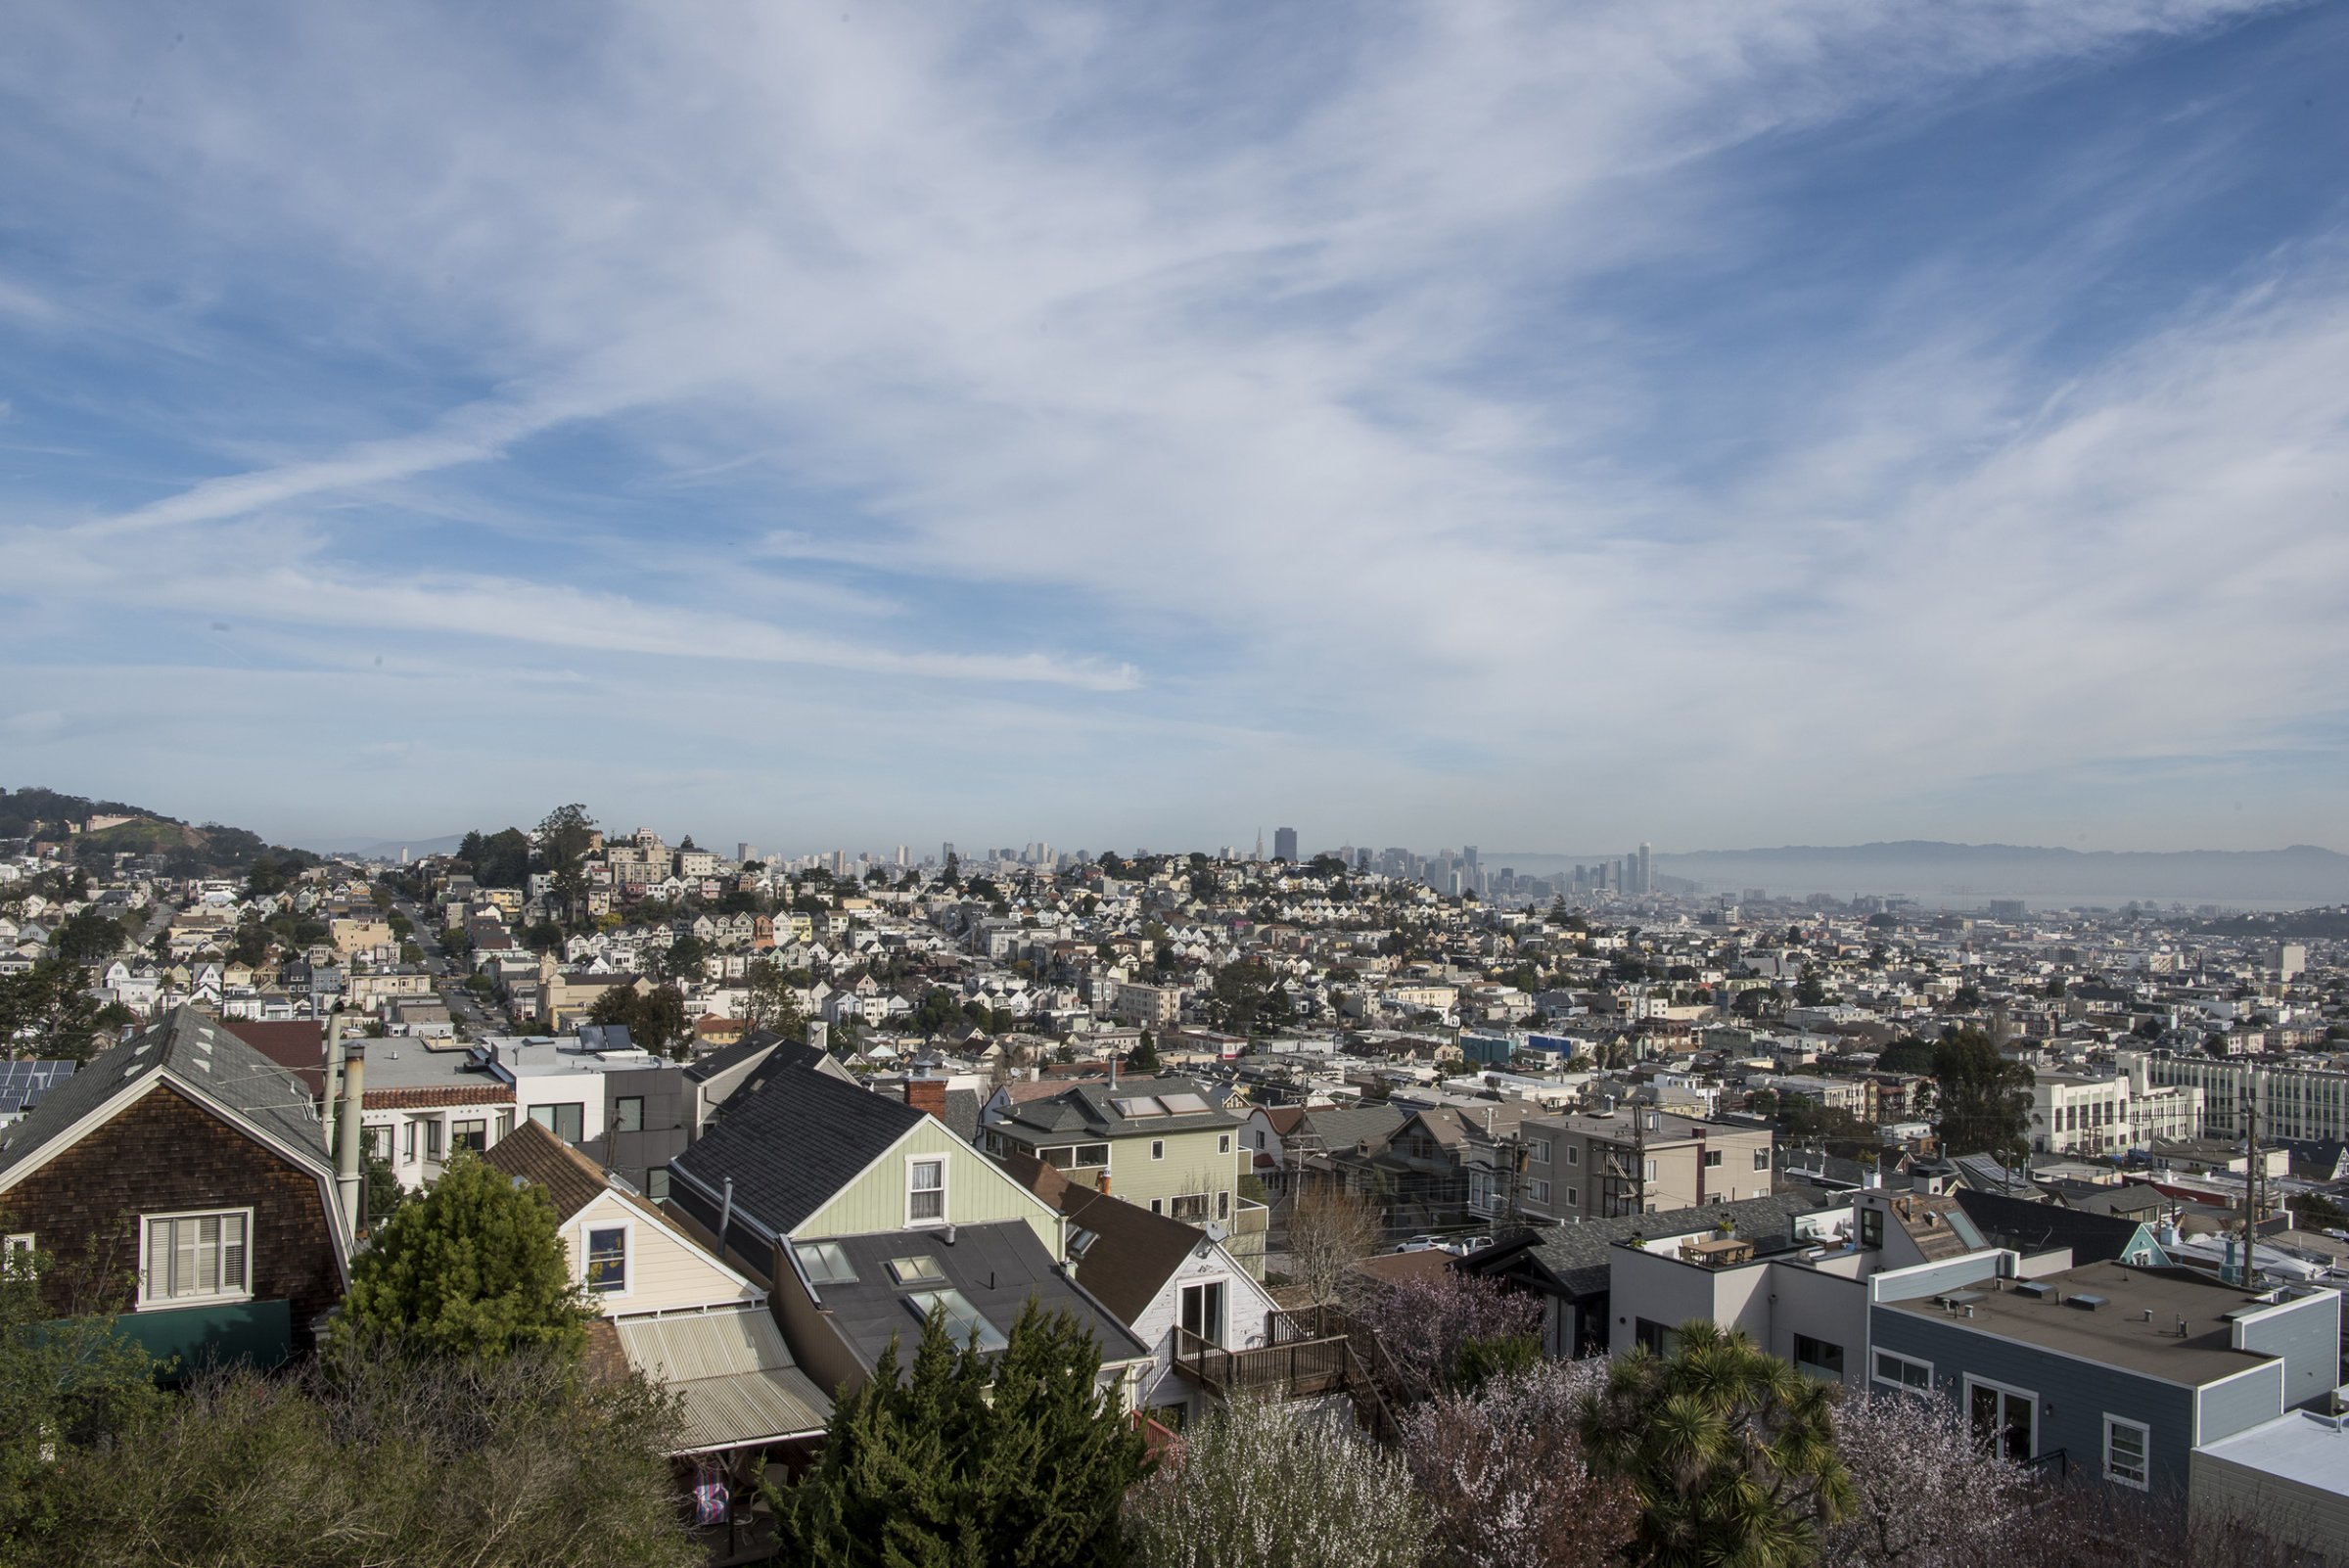 City skyline views from a house listed at US$ 5.49 million are seen in San Francisco, Calif. on Feb. 12, 2016.